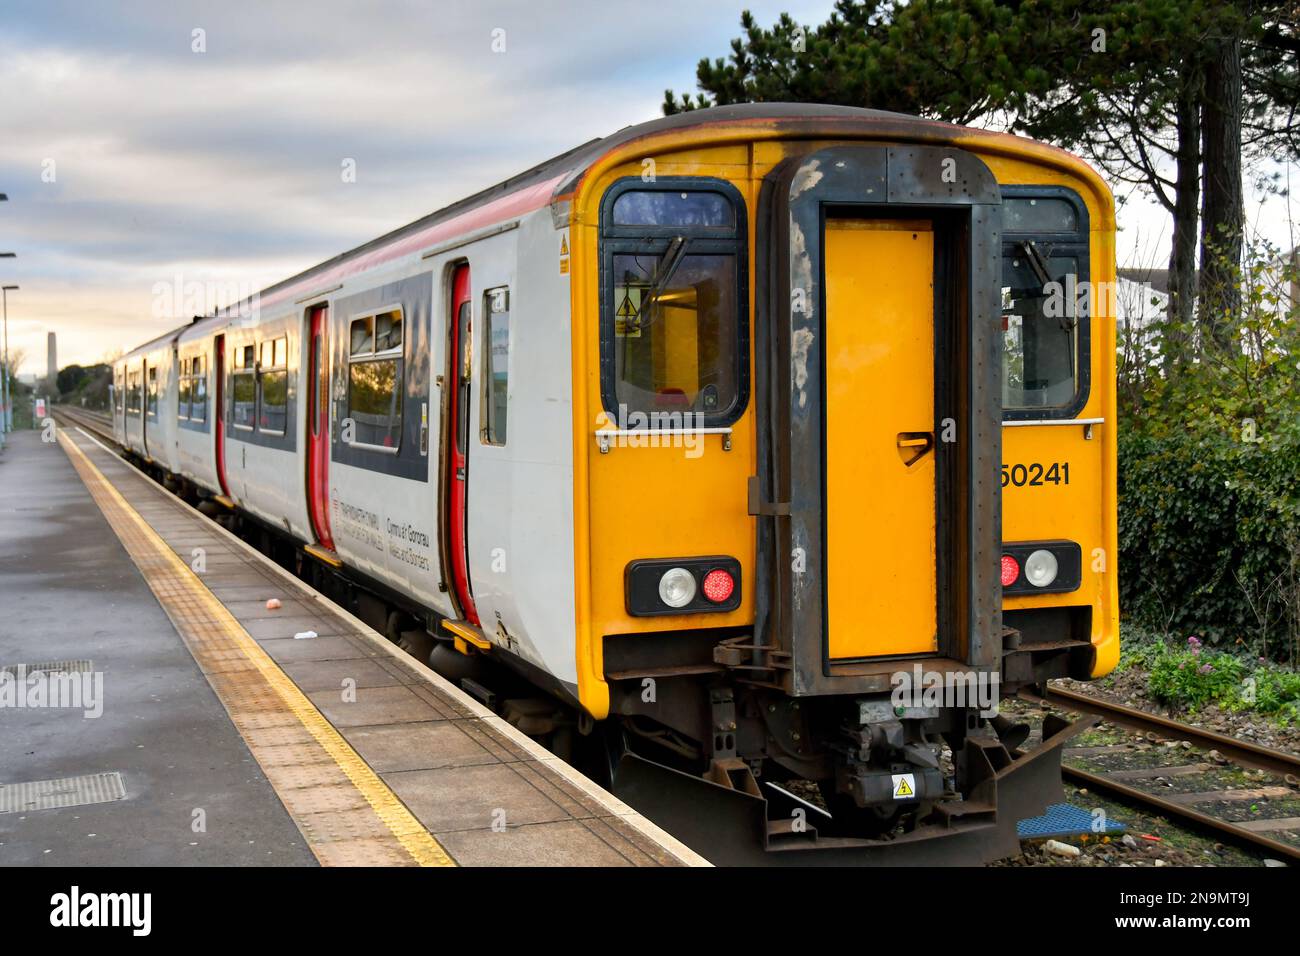 Rhoose, Wales - November 2022: Train about to leave Rhoose railway station at sunset. The train is operated by Transport for Wales. Stock Photo